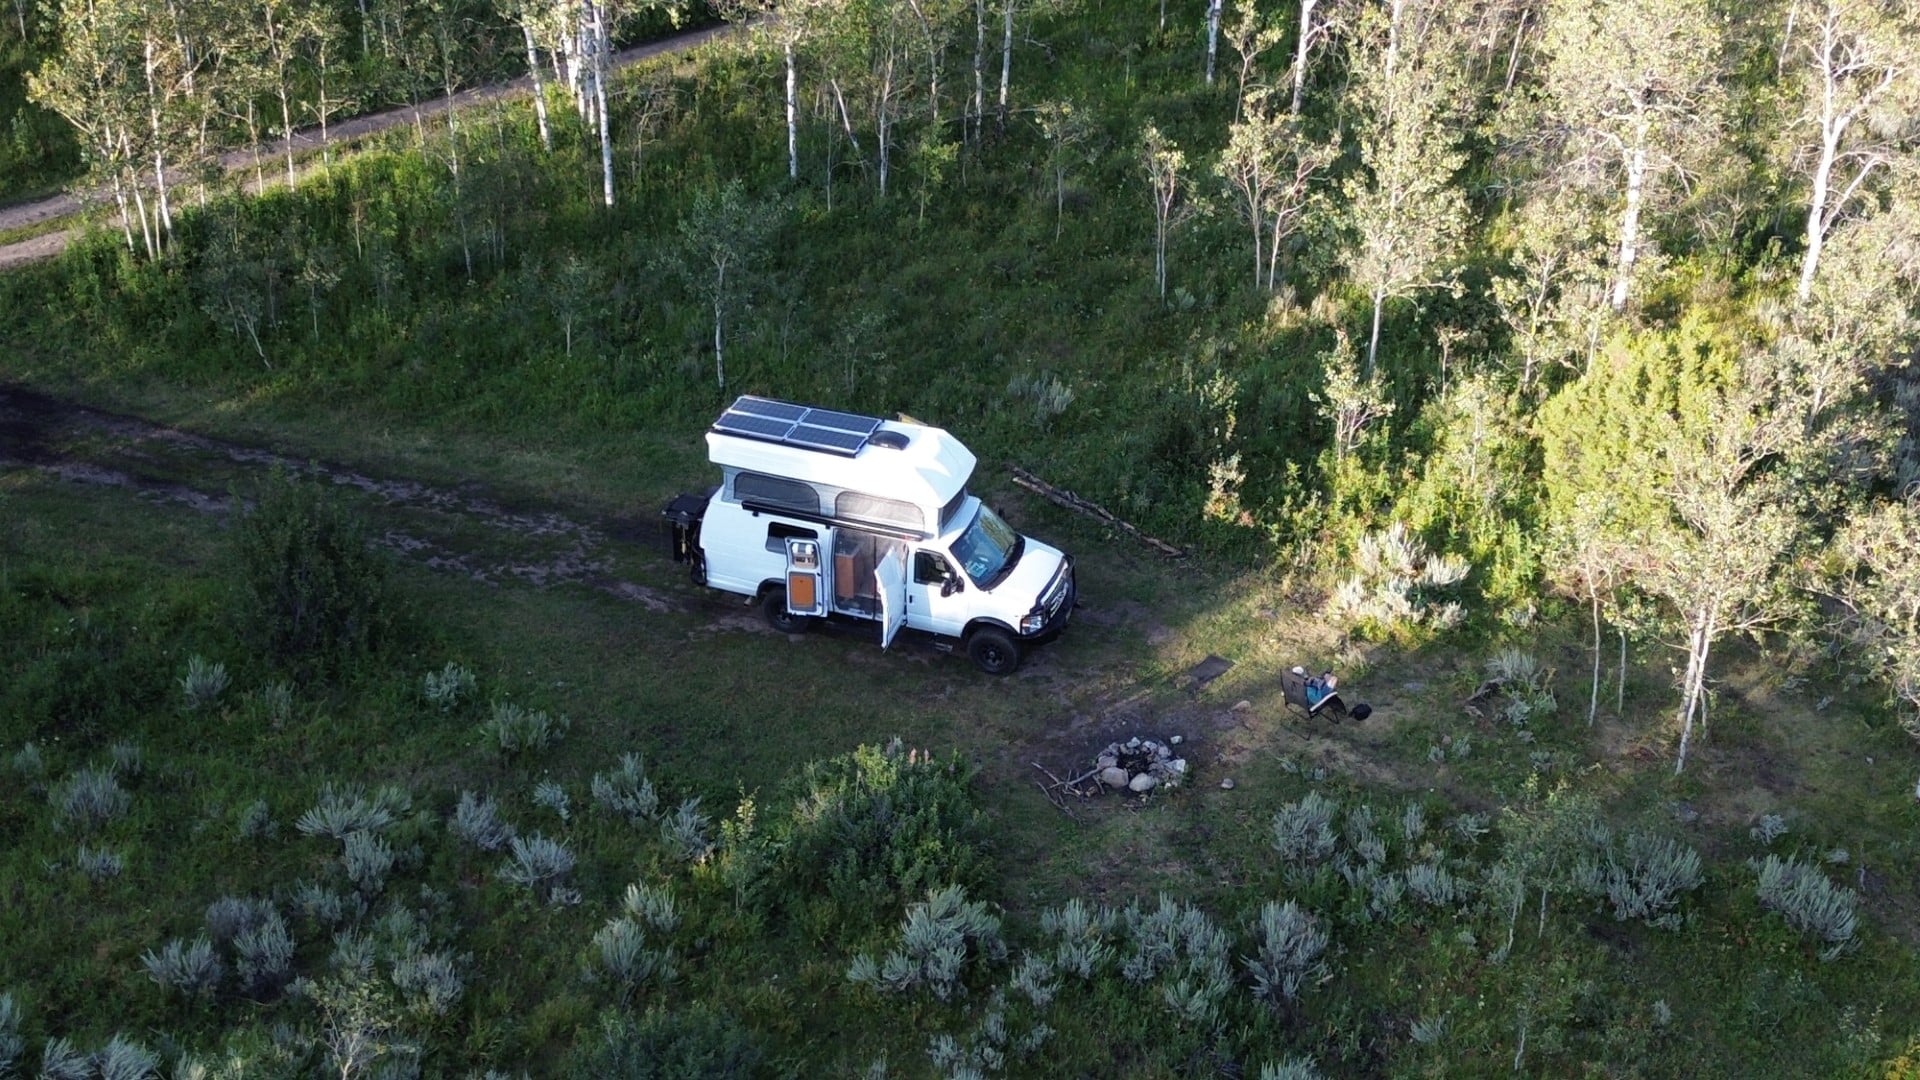 A drone shot of a white van boondocking off-grid.